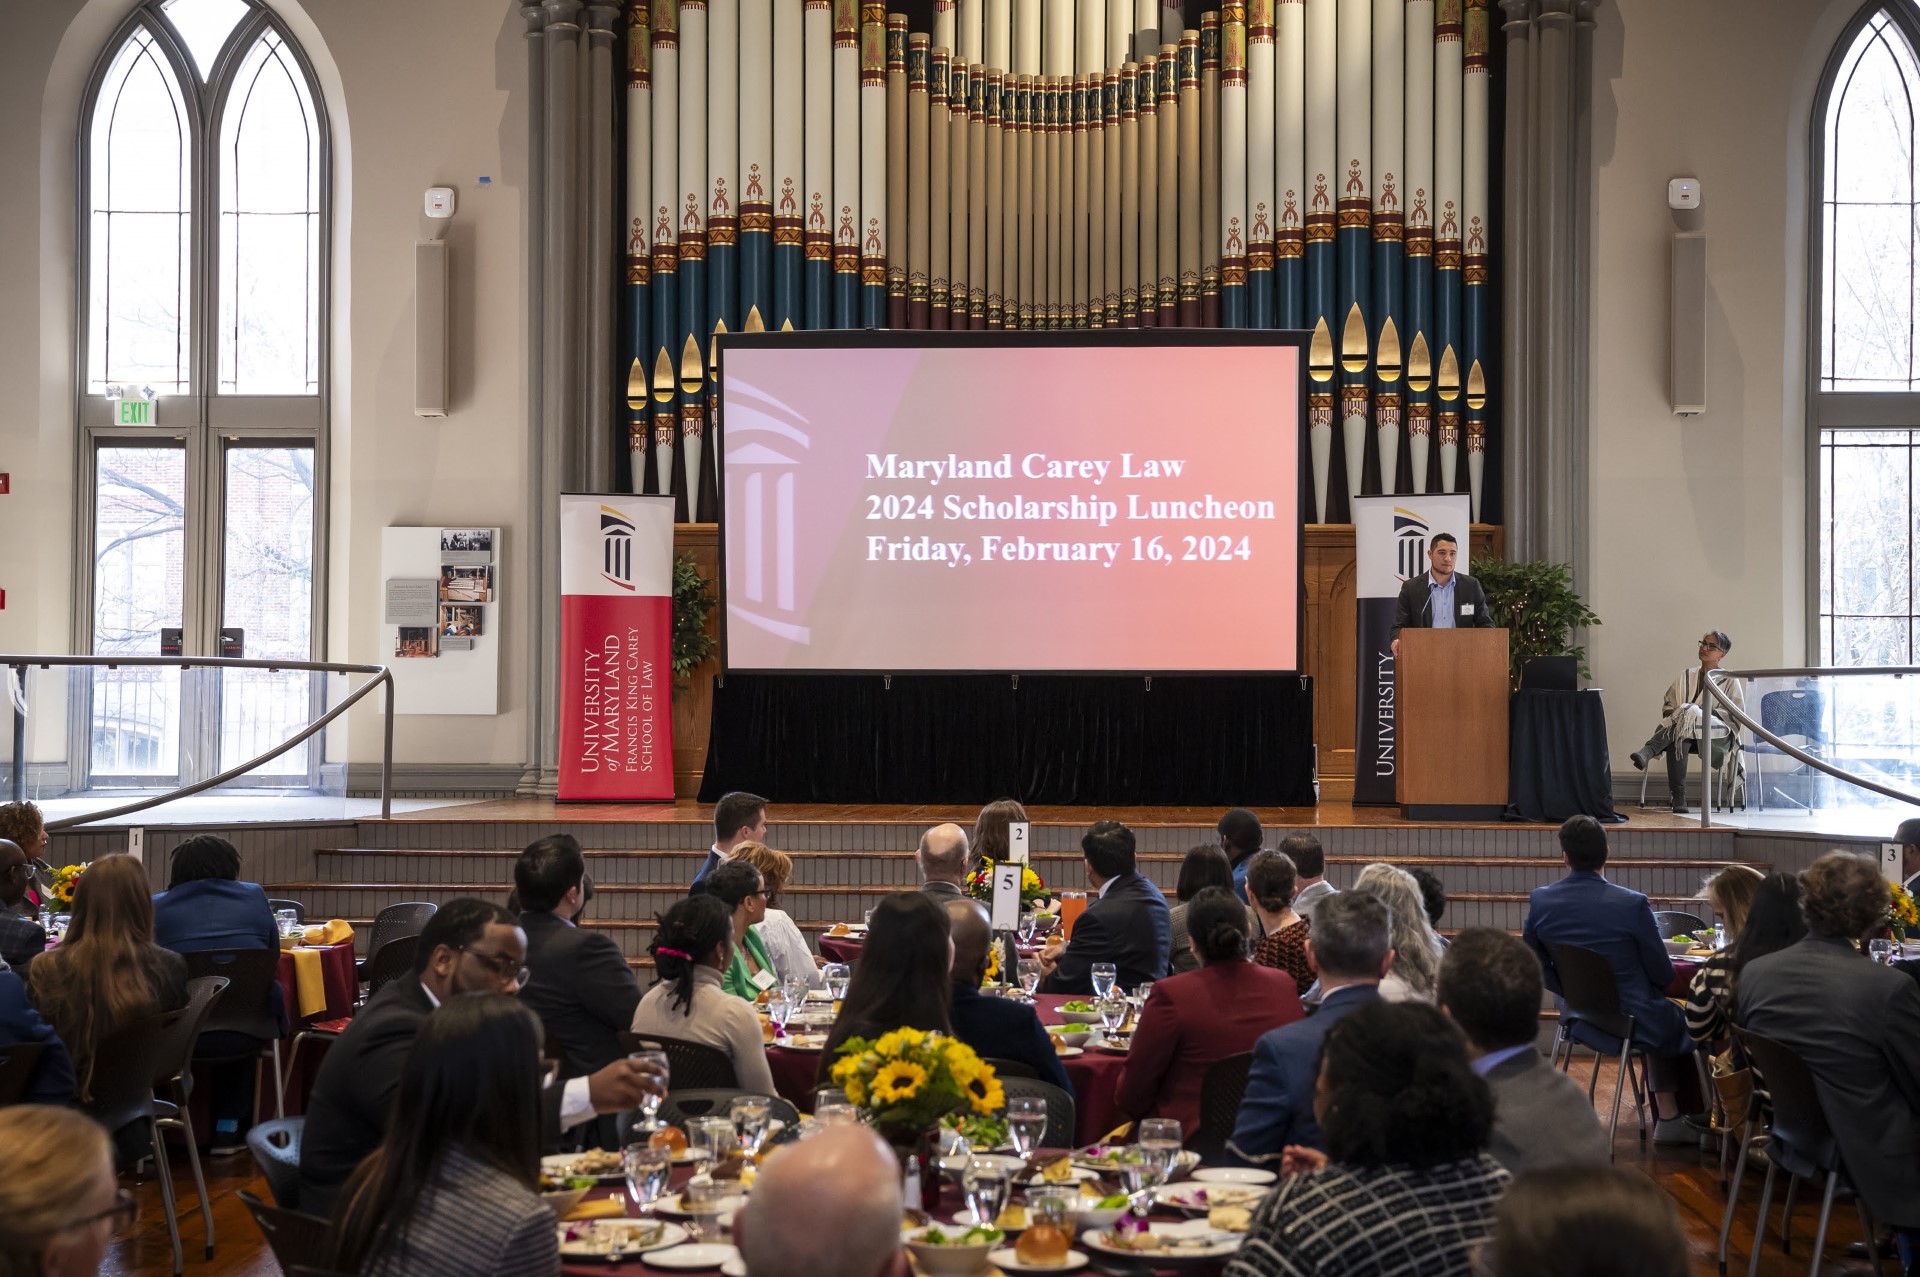 Maryland Carey Law celebrates Scholarship Giving at annual Scholarship Luncheon